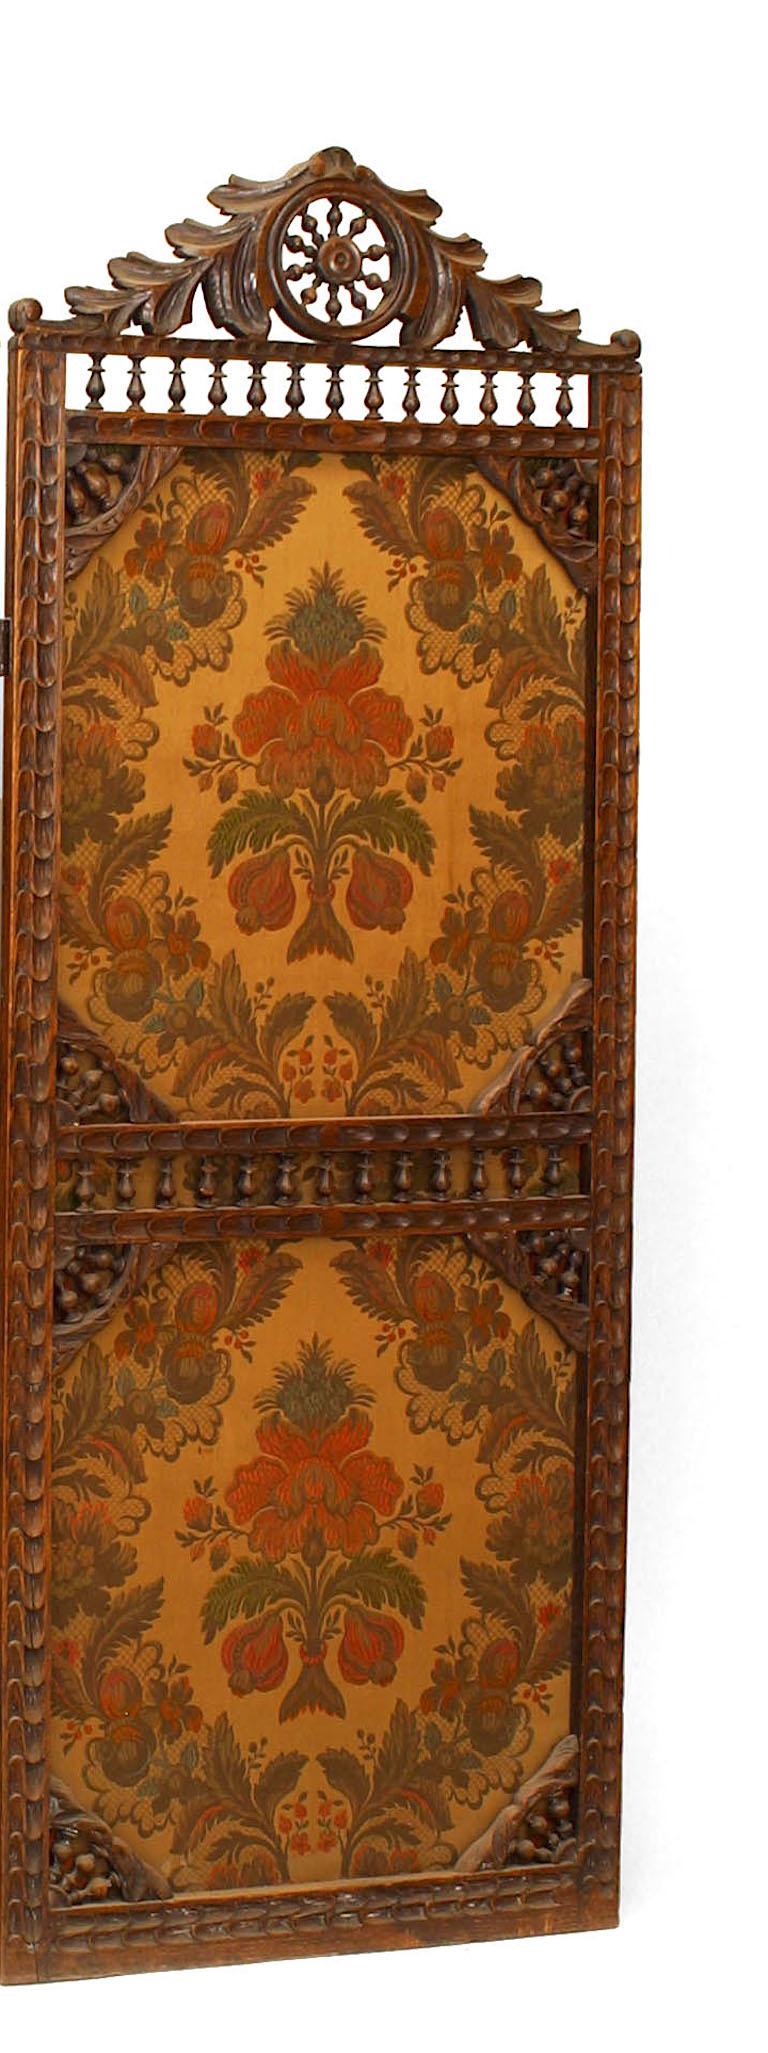 English Victorian walnut 3 fold screen with spindle design and wheel top with embroidered floral panels.
